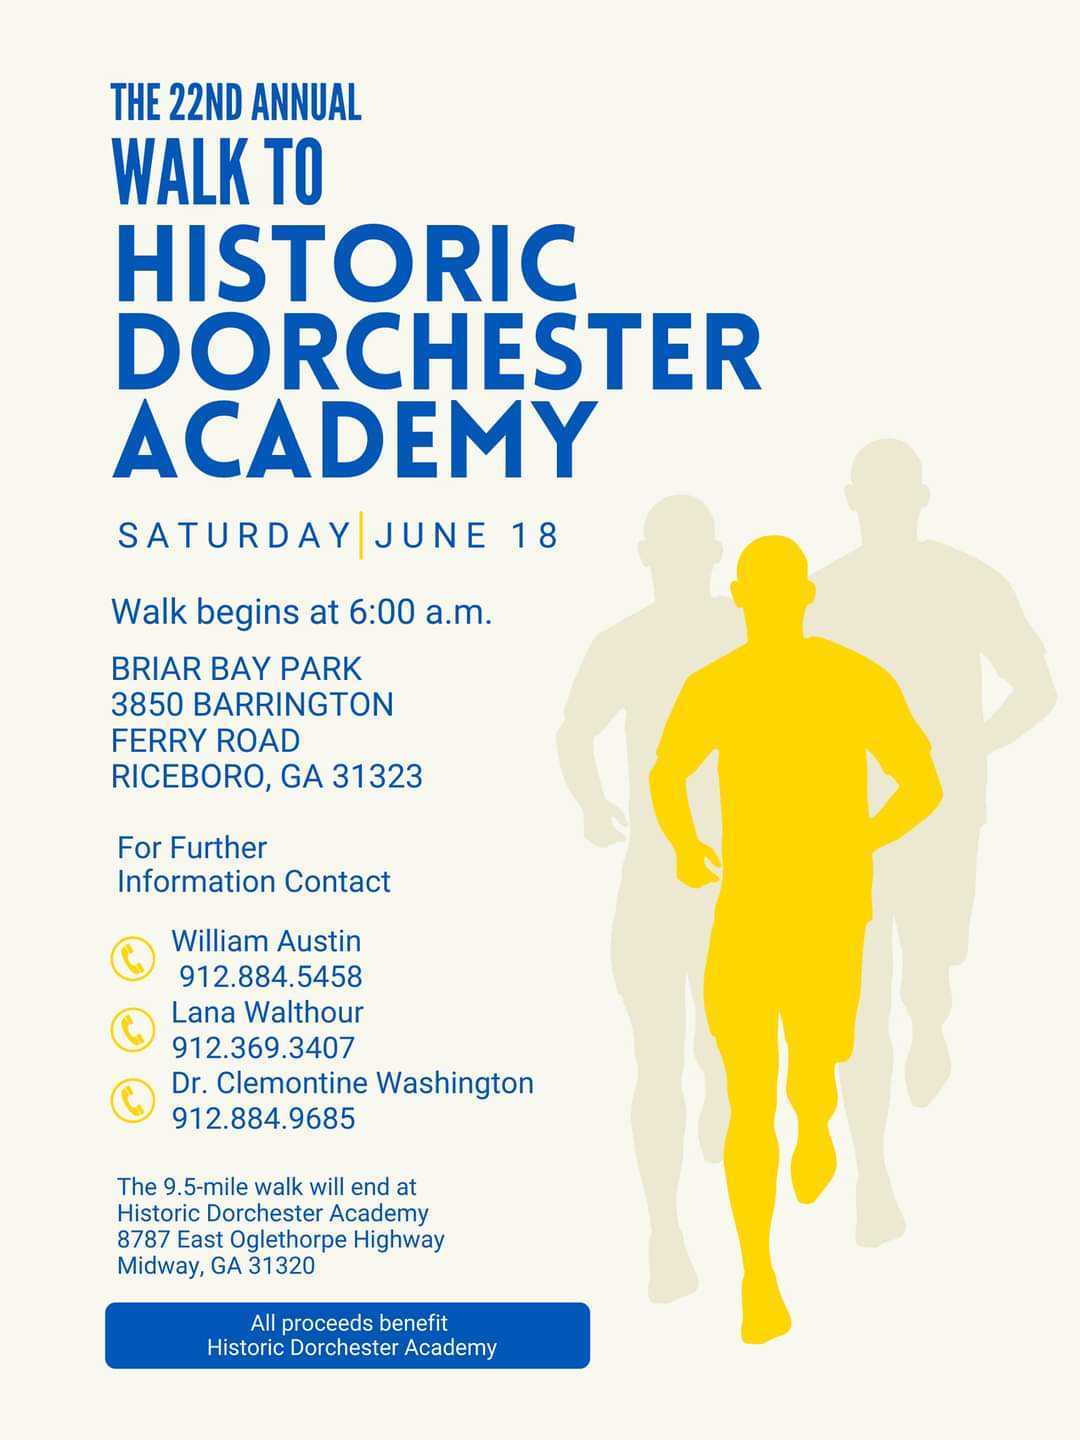 22nd Annual Walk to Historic Dorchester Academy